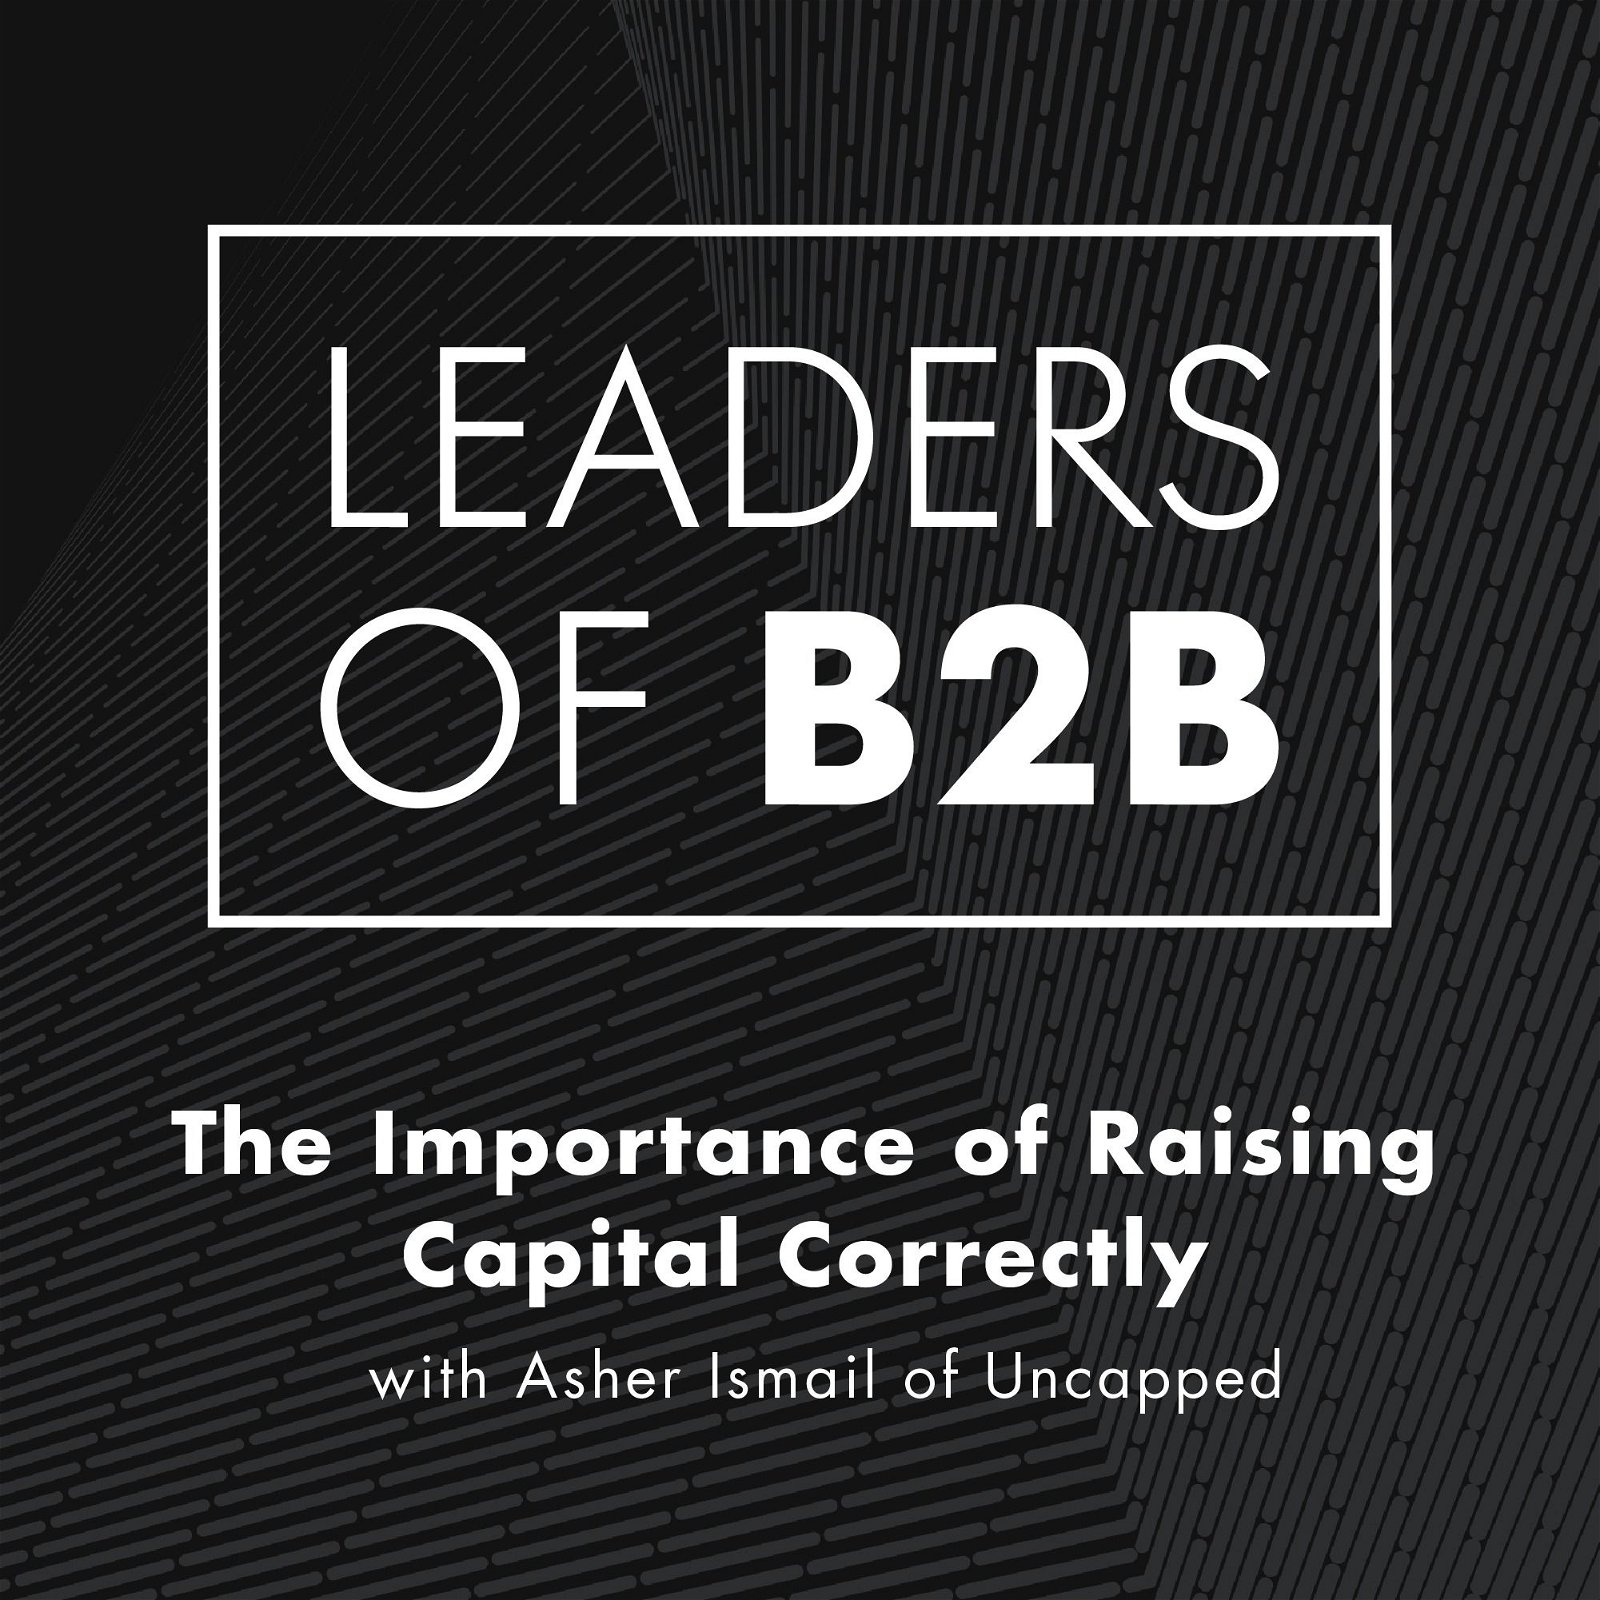 The Importance of Raising Capital Correctly with Asher Ismail of Uncapped